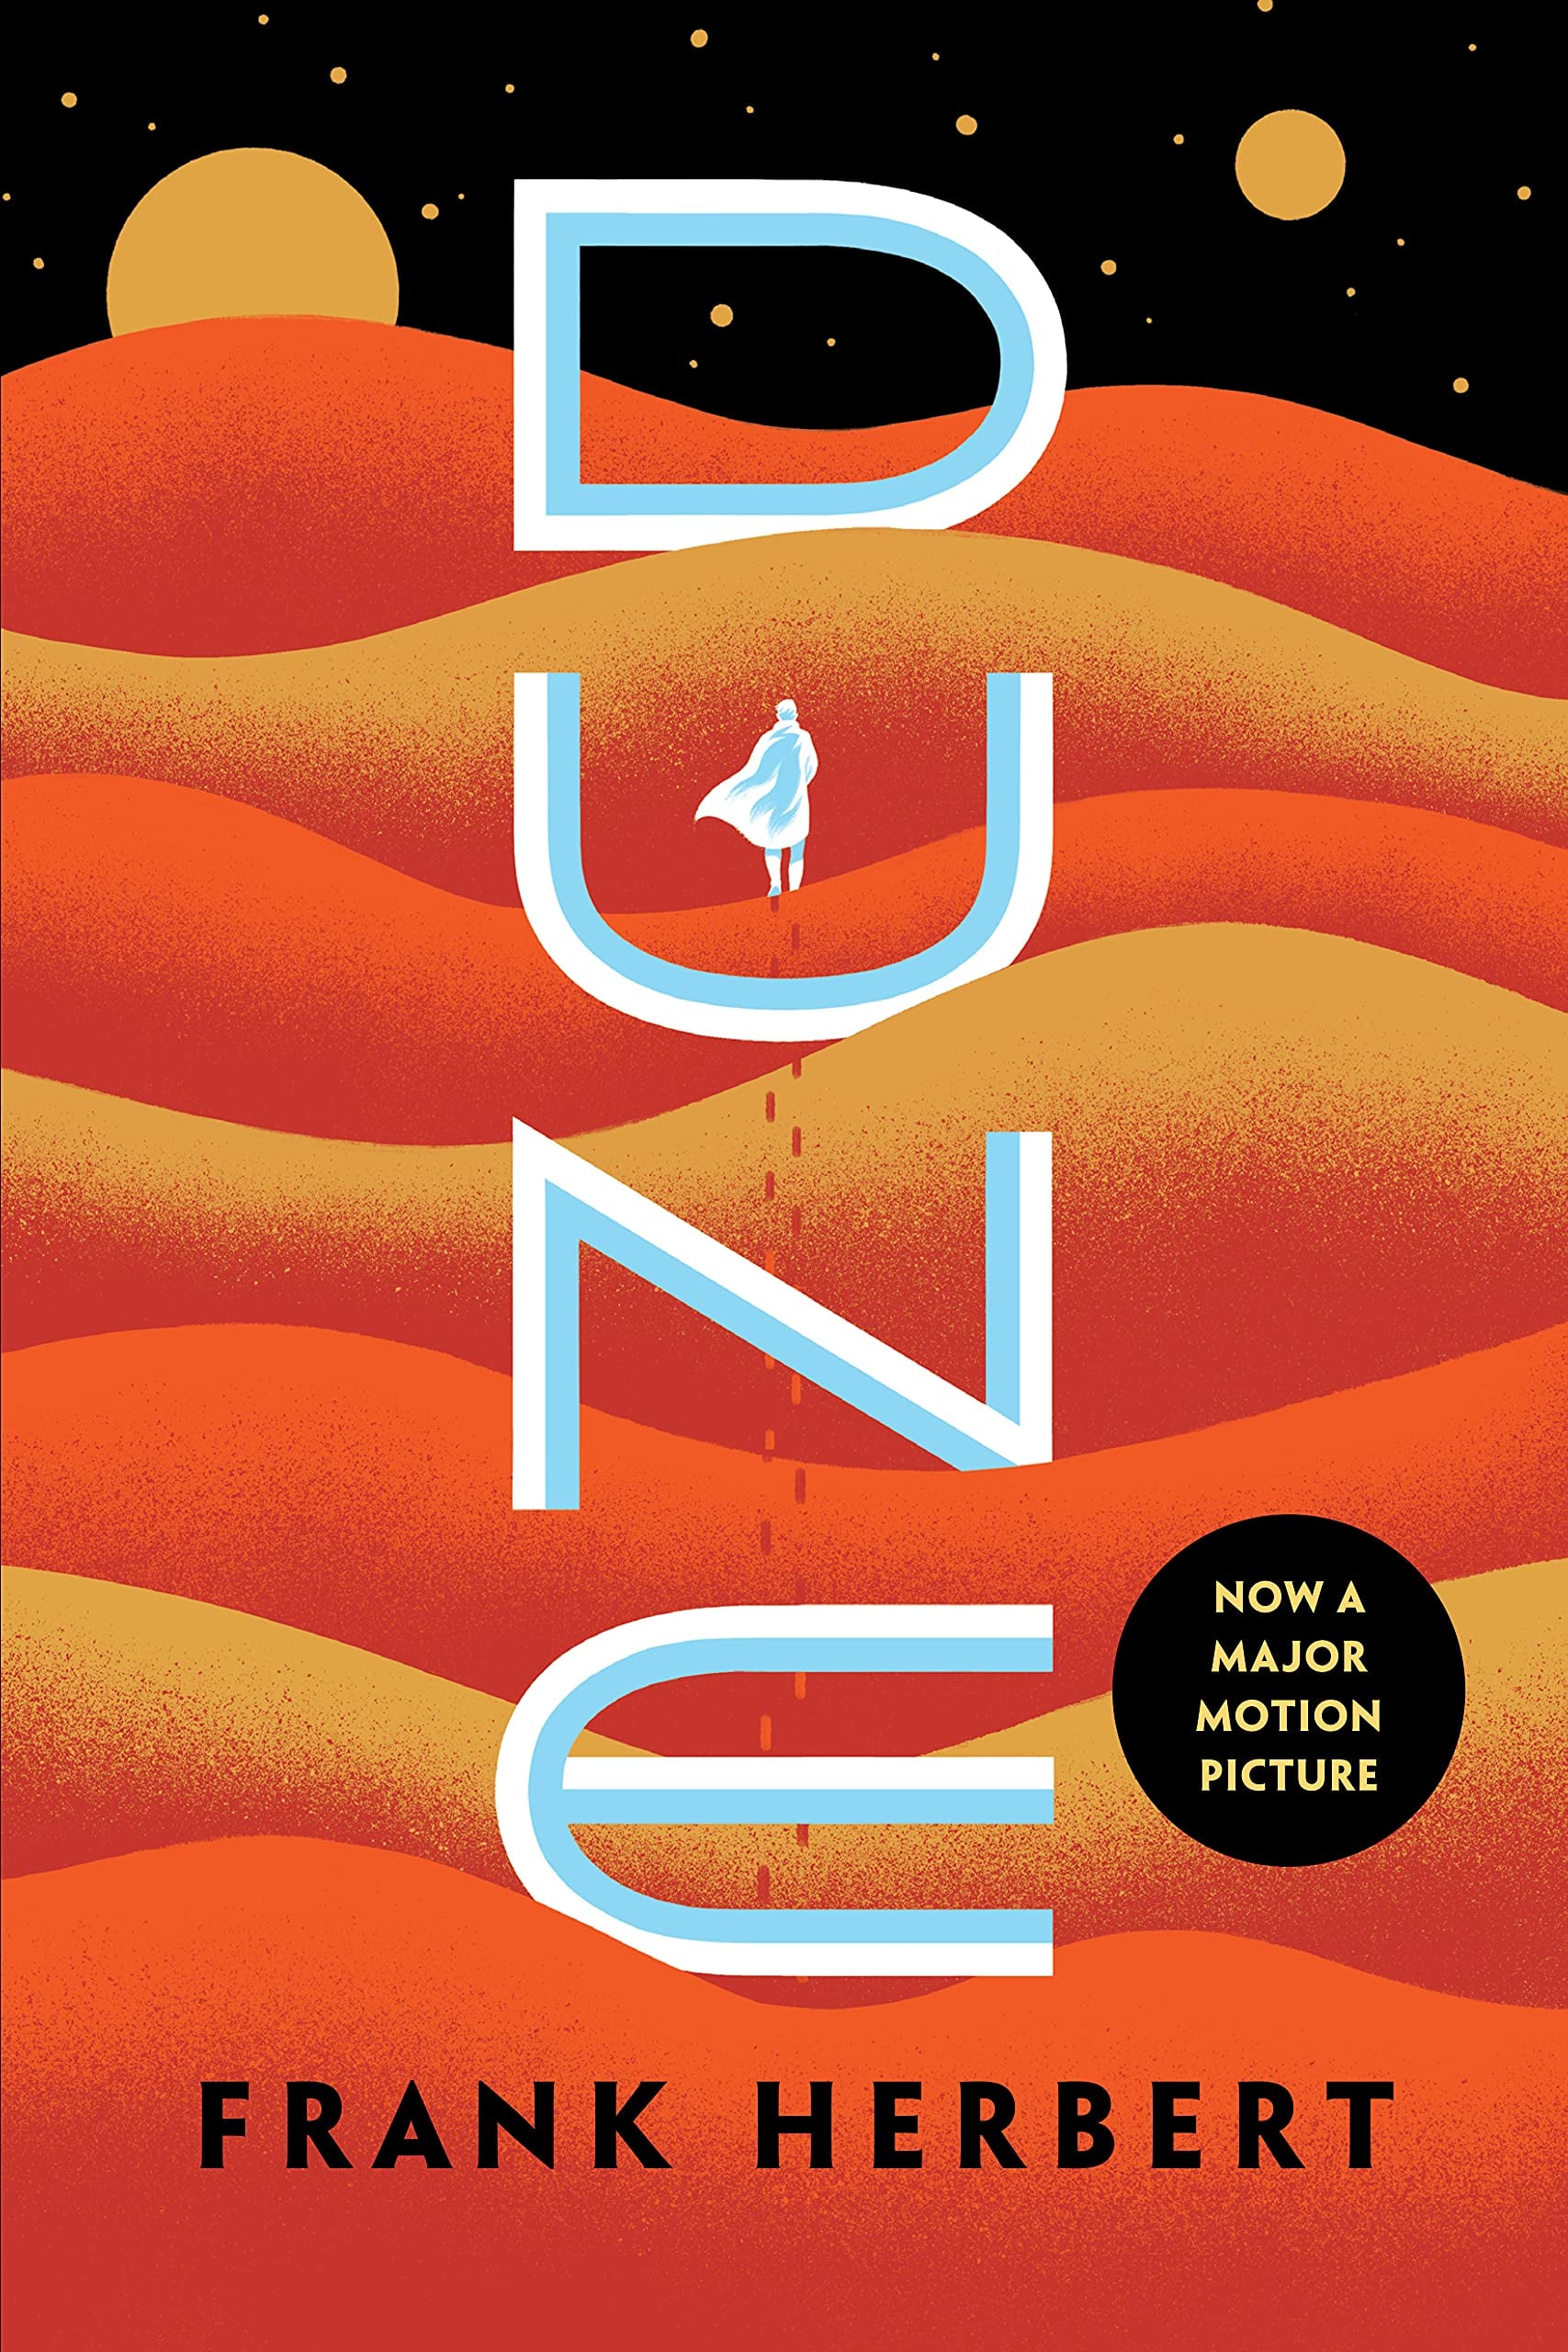 What Is 'Dune' About? Everything To Know From The 'Dune' Book